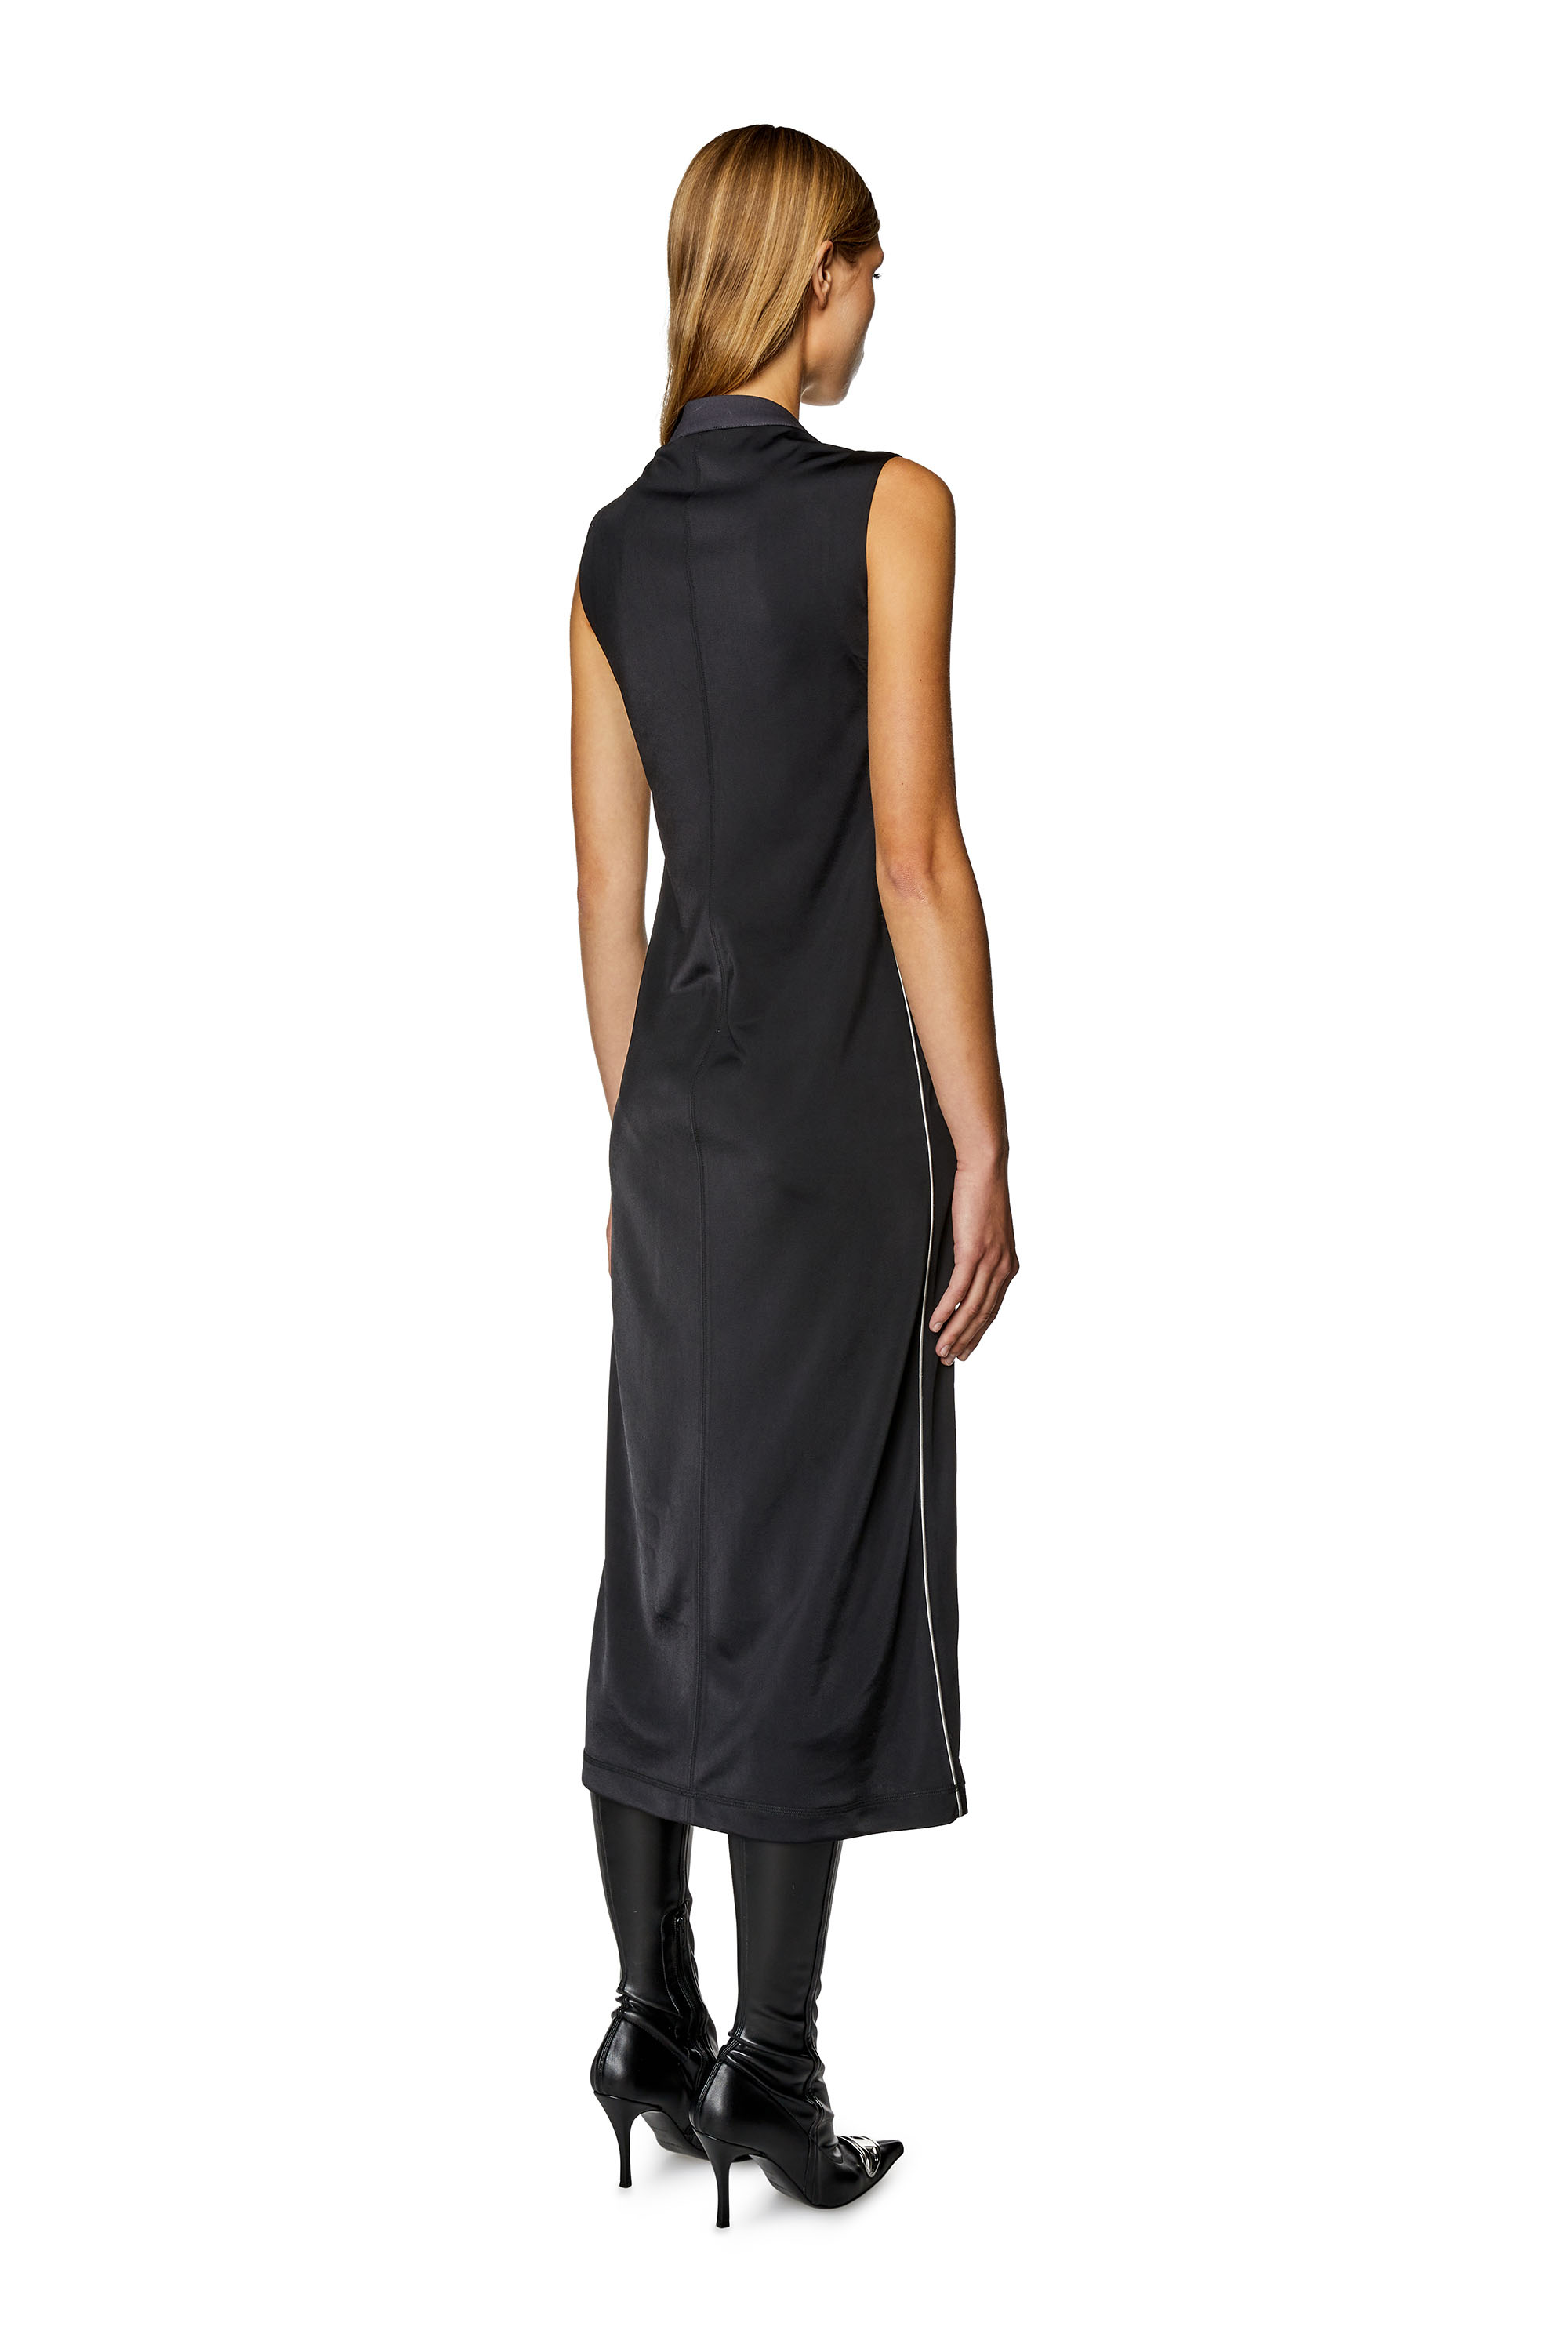 Diesel - D-AMY, Woman Midi dress in cool wool and tech fabric in Multicolor - Image 2